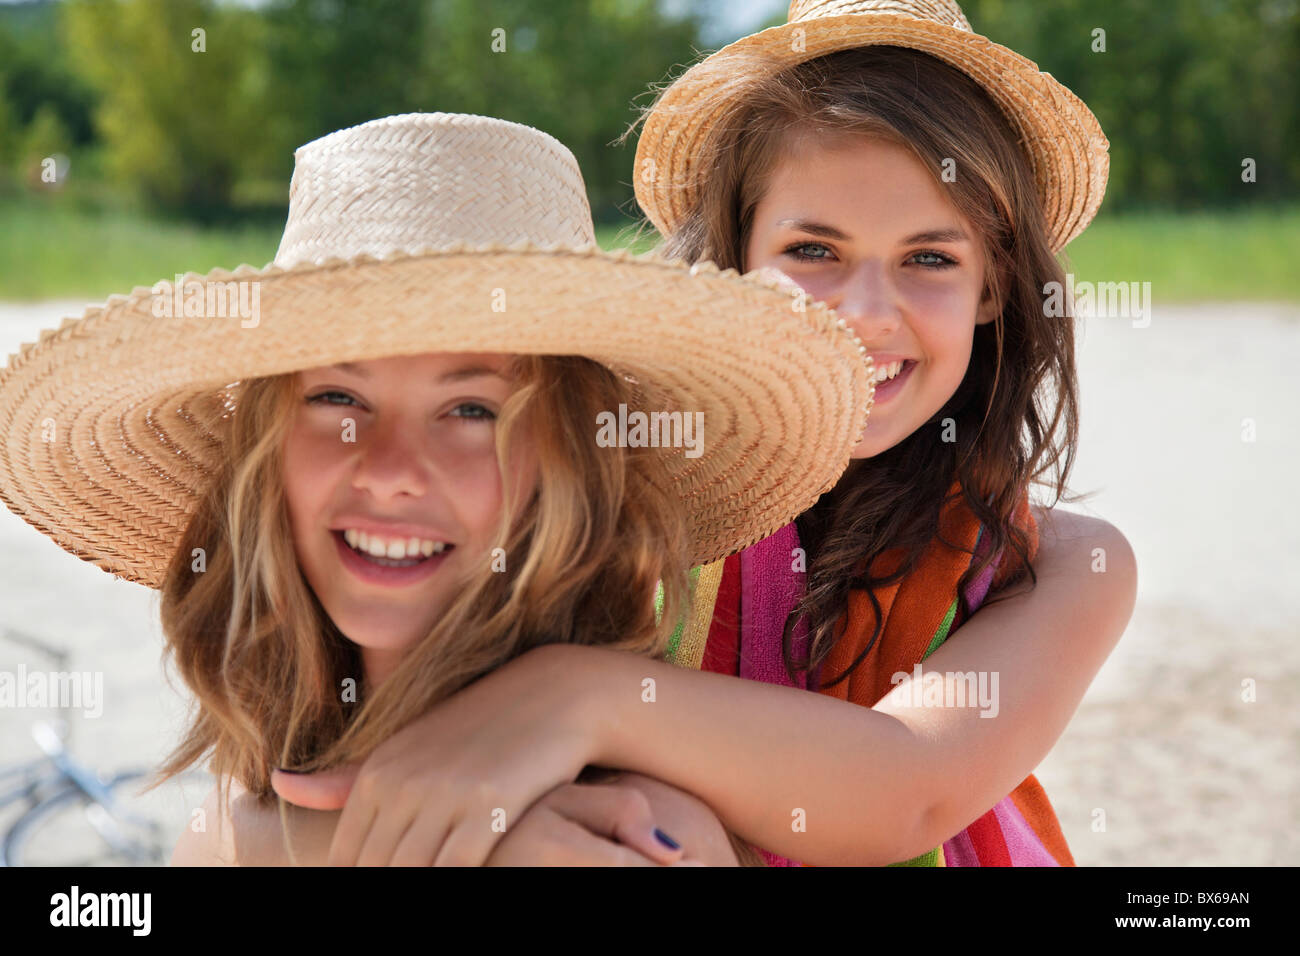 Pretty women together in the sunshine Stock Photo